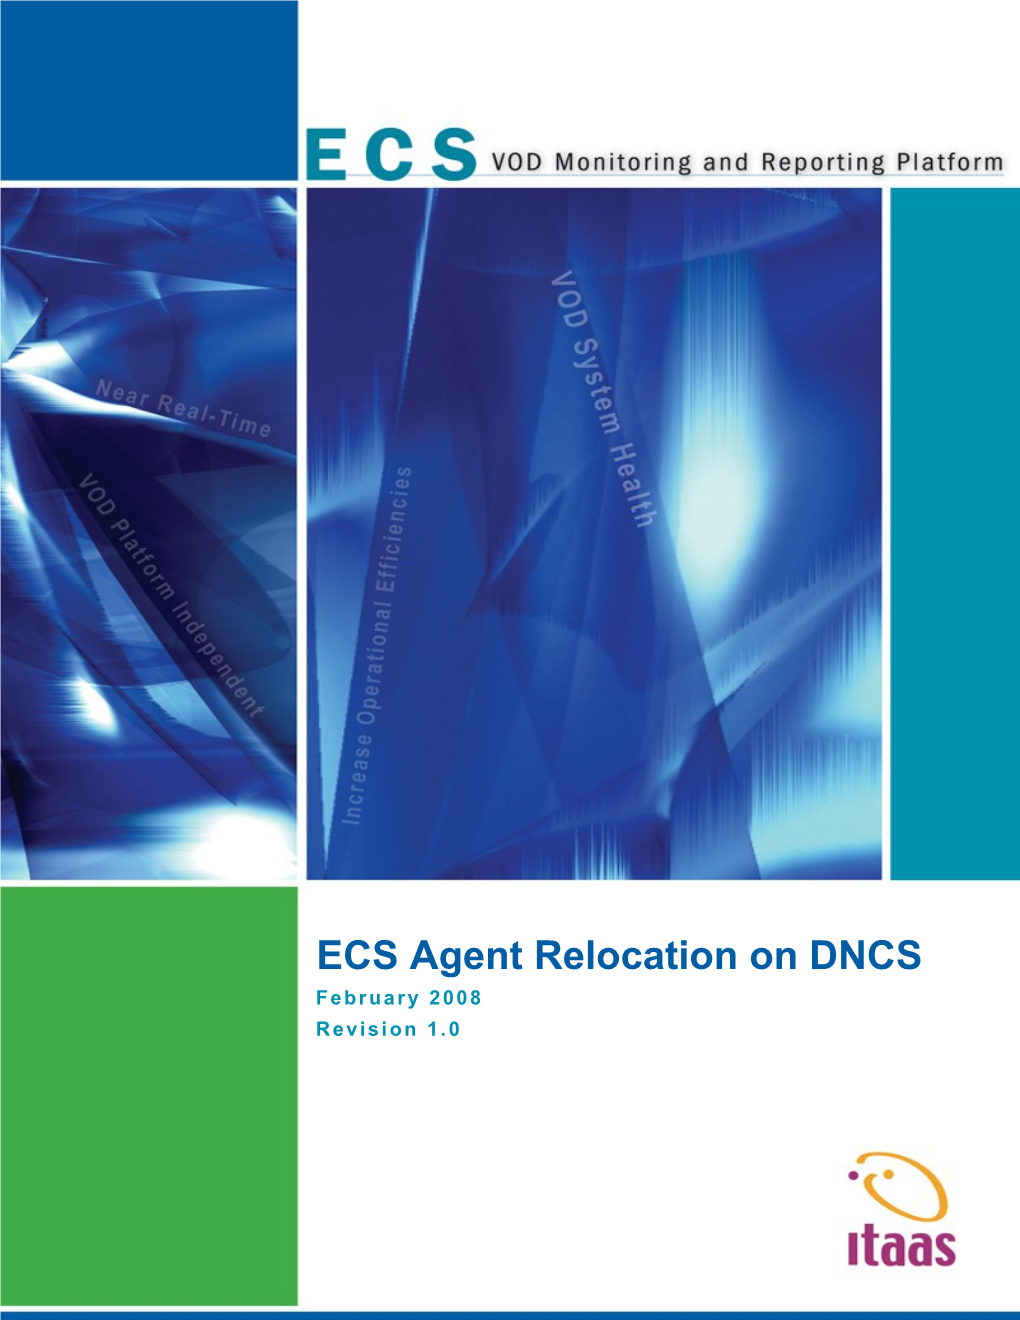 ECS Agent Relocation on DNCS Guide